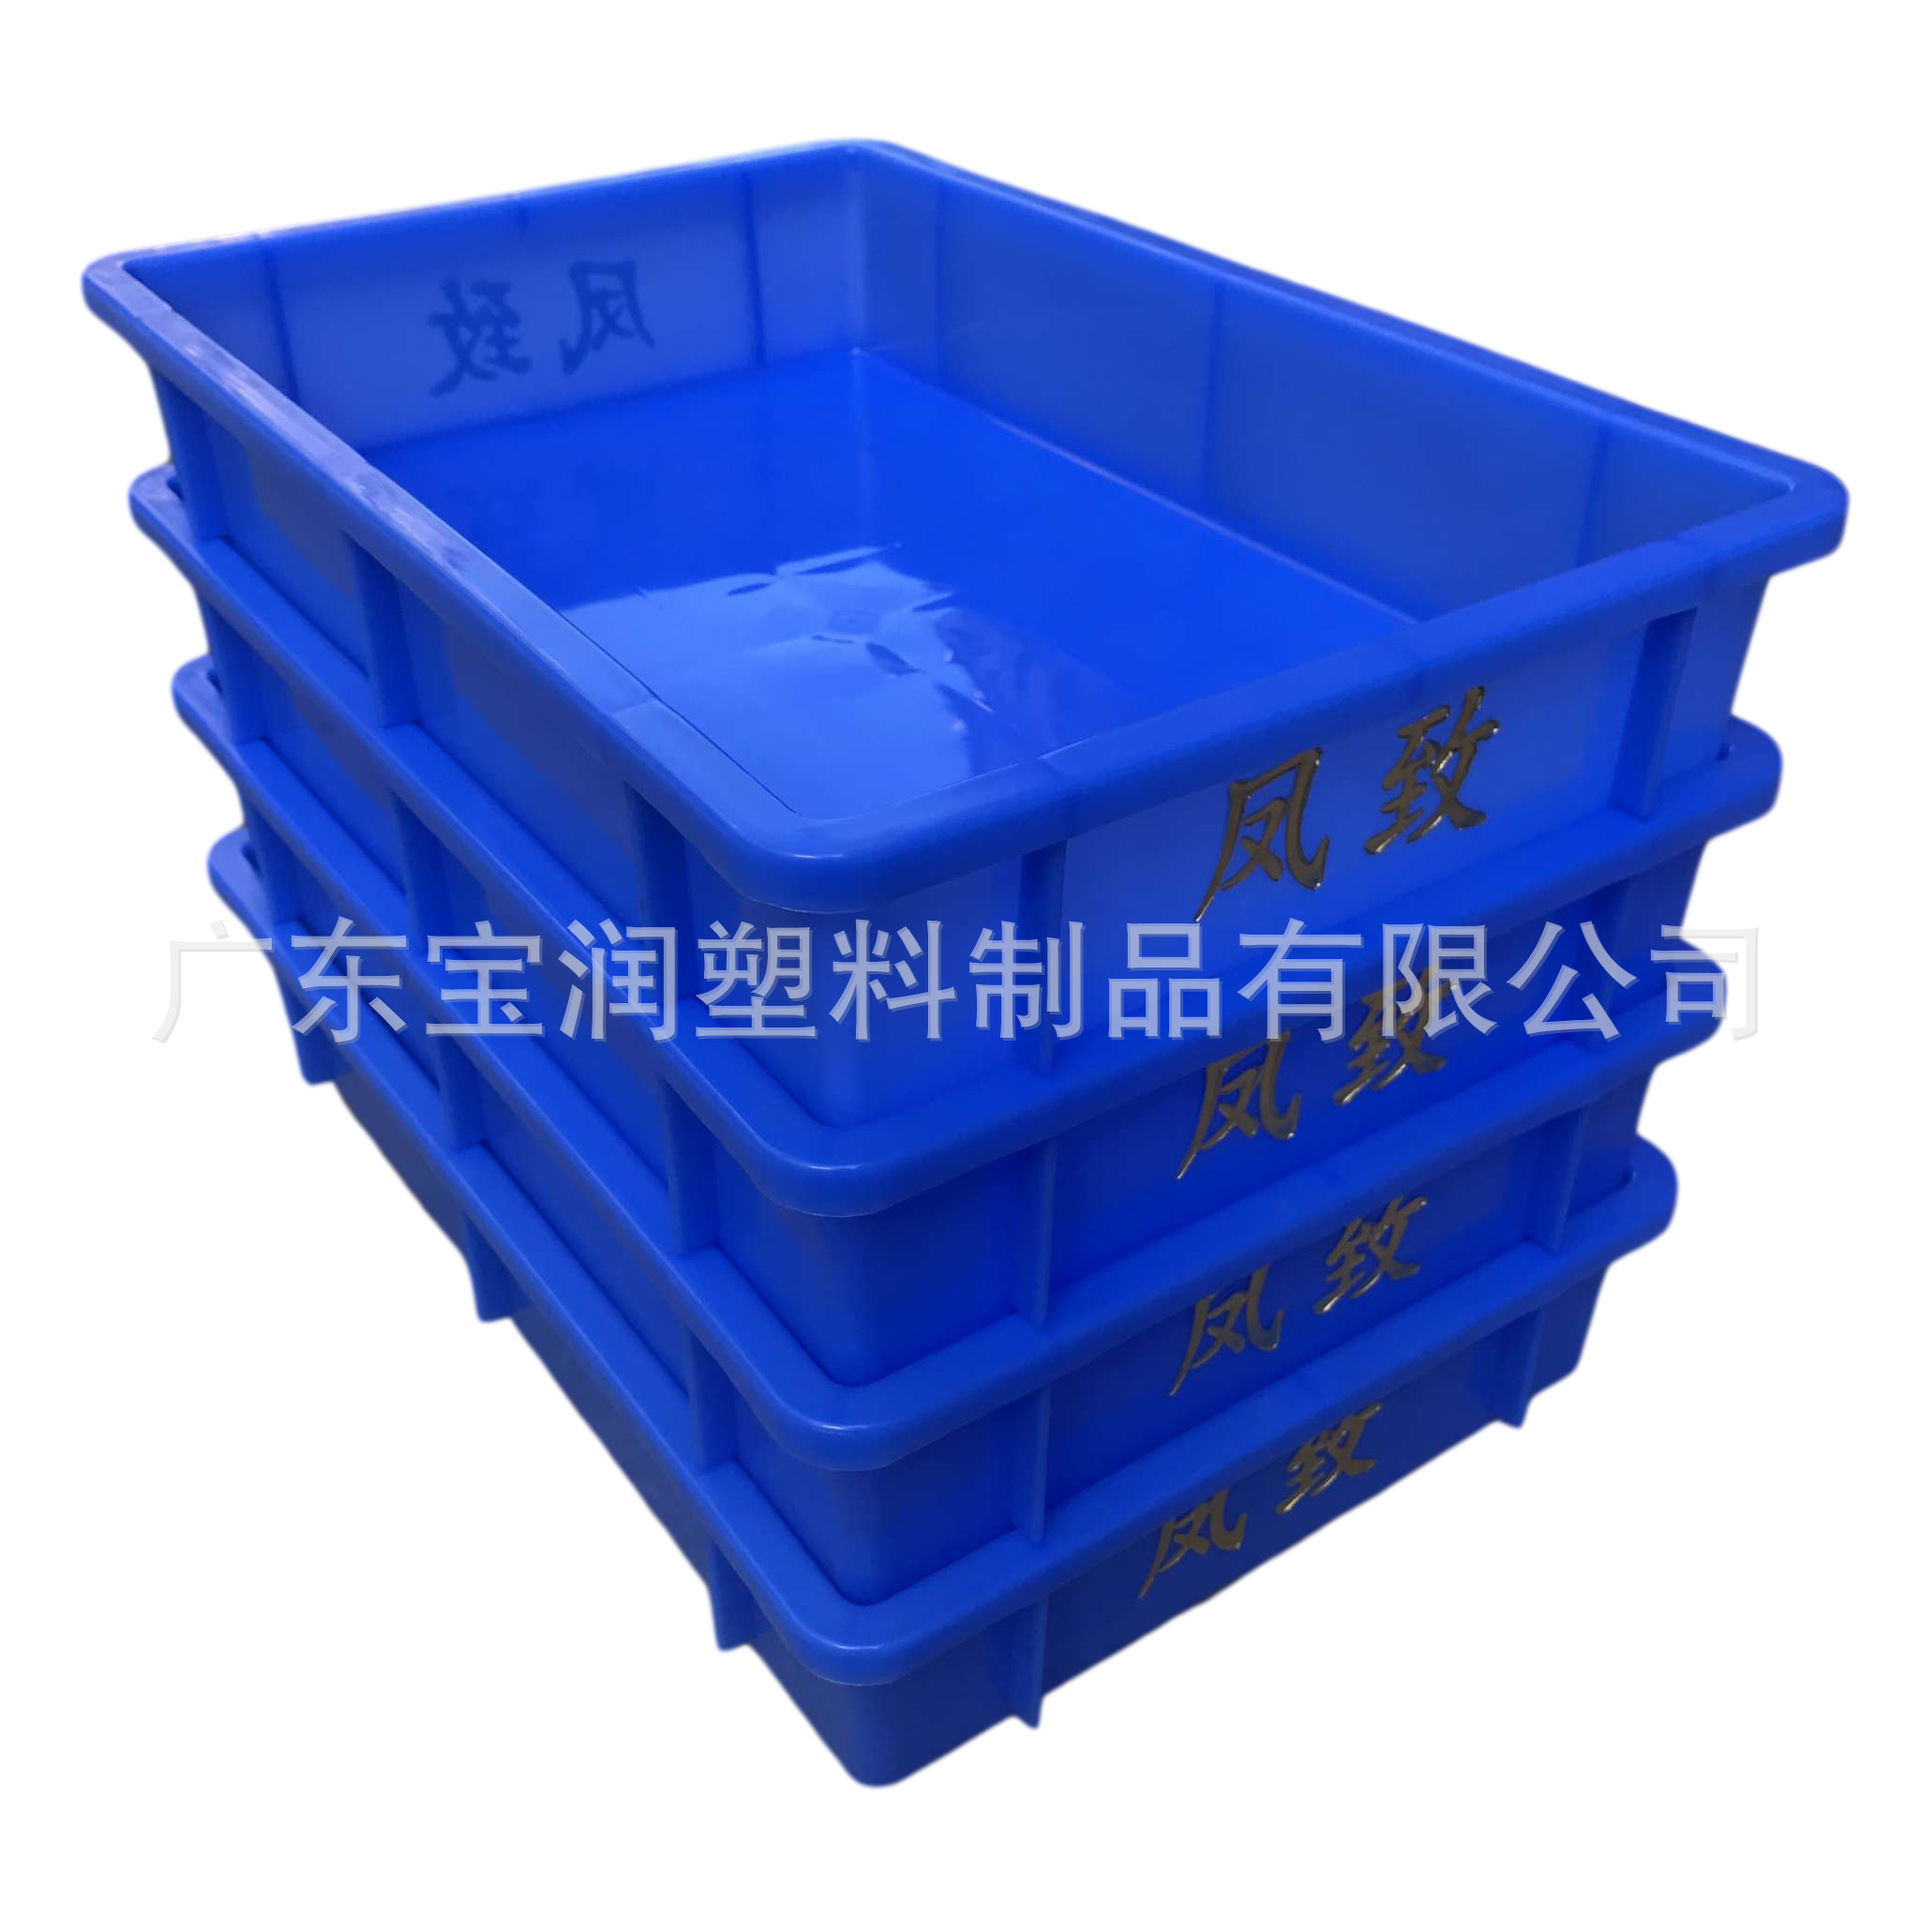 Plastic Square Plate Anti-Static Container Black Esd Electronic Material Box Electrostatic Rubber Frame Storage Box Accessories